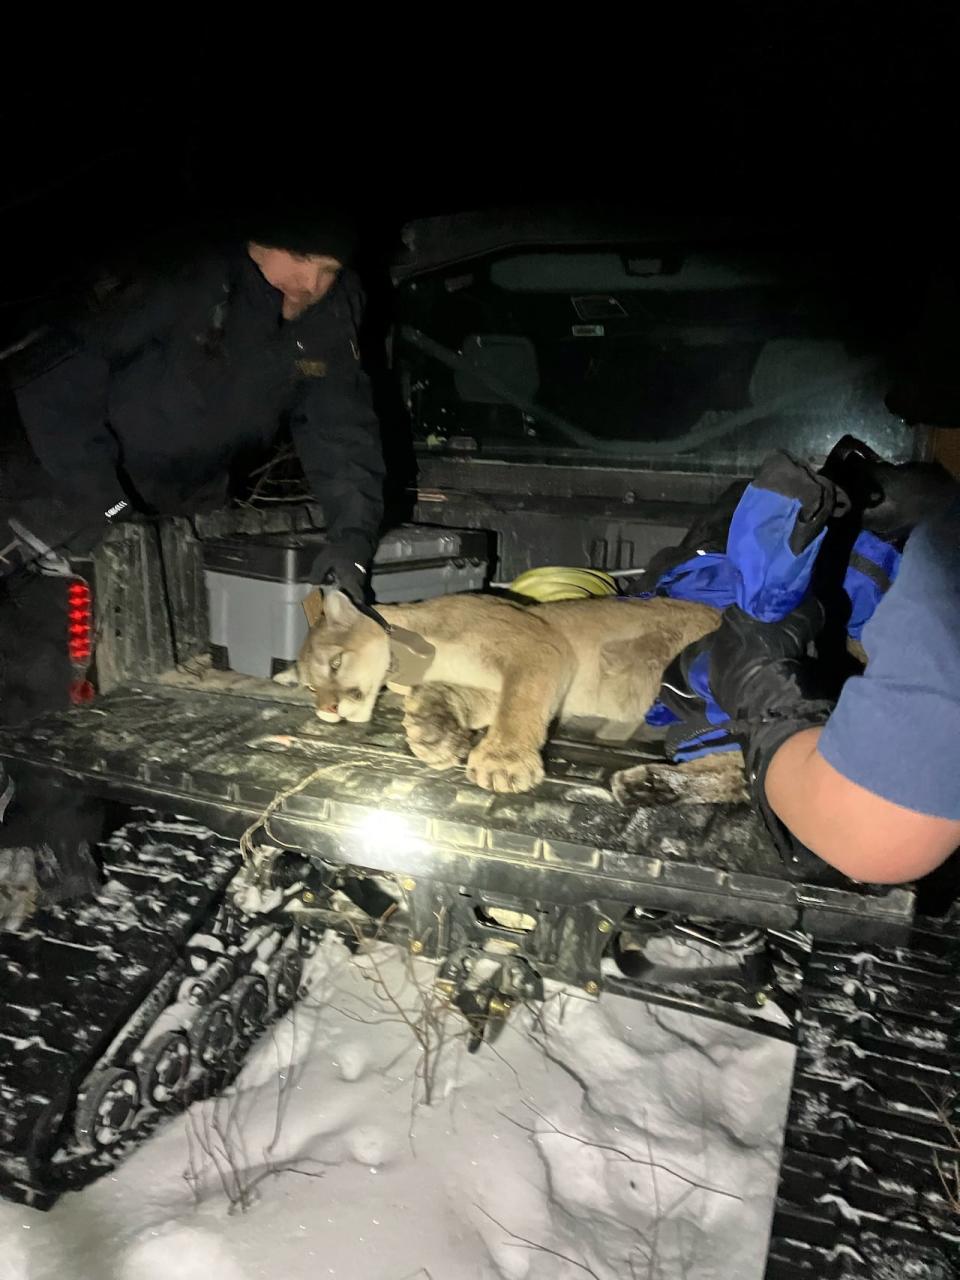 Janzen reported his find to conservation officers, who tranquilized the cougar, took measurements and hair and blood samples, and released it with a radio collar.